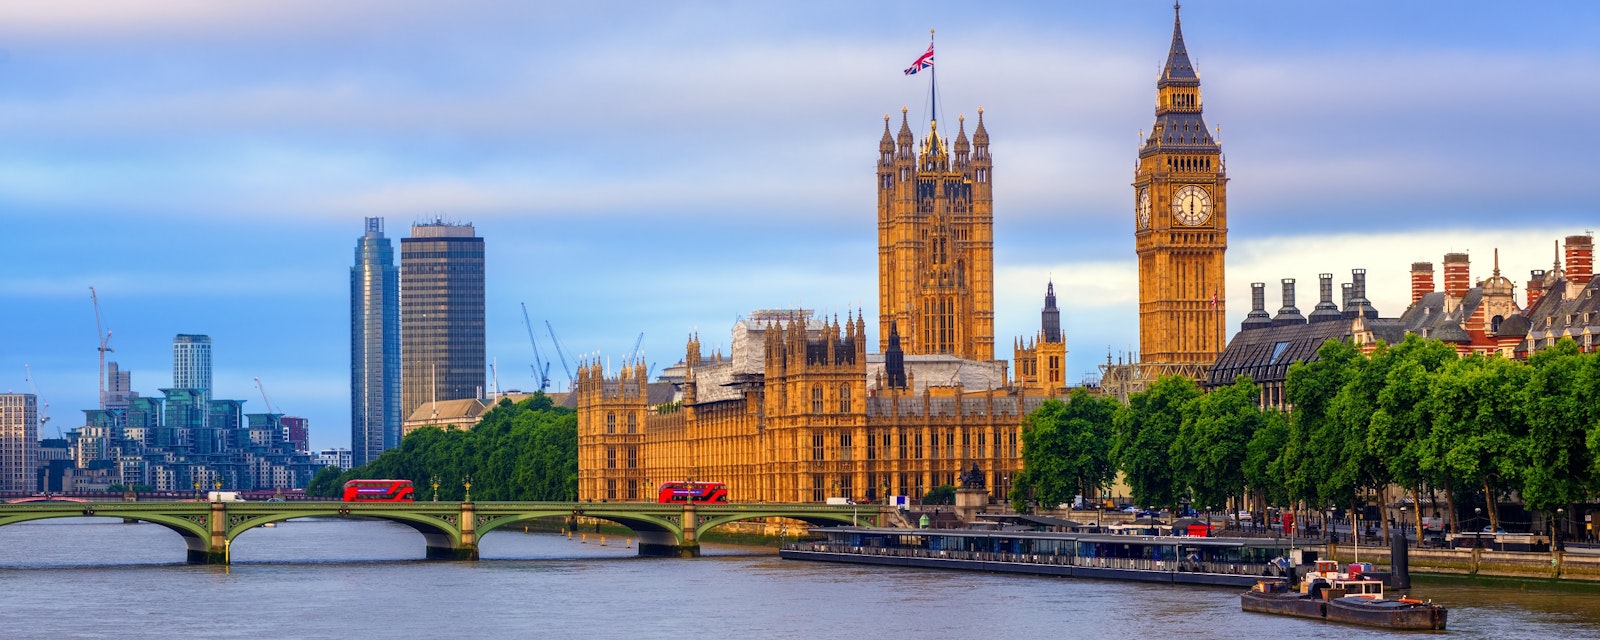 London,,England,,The,Big,Ben,,The,Houses,Of,Parliament,,Westminster